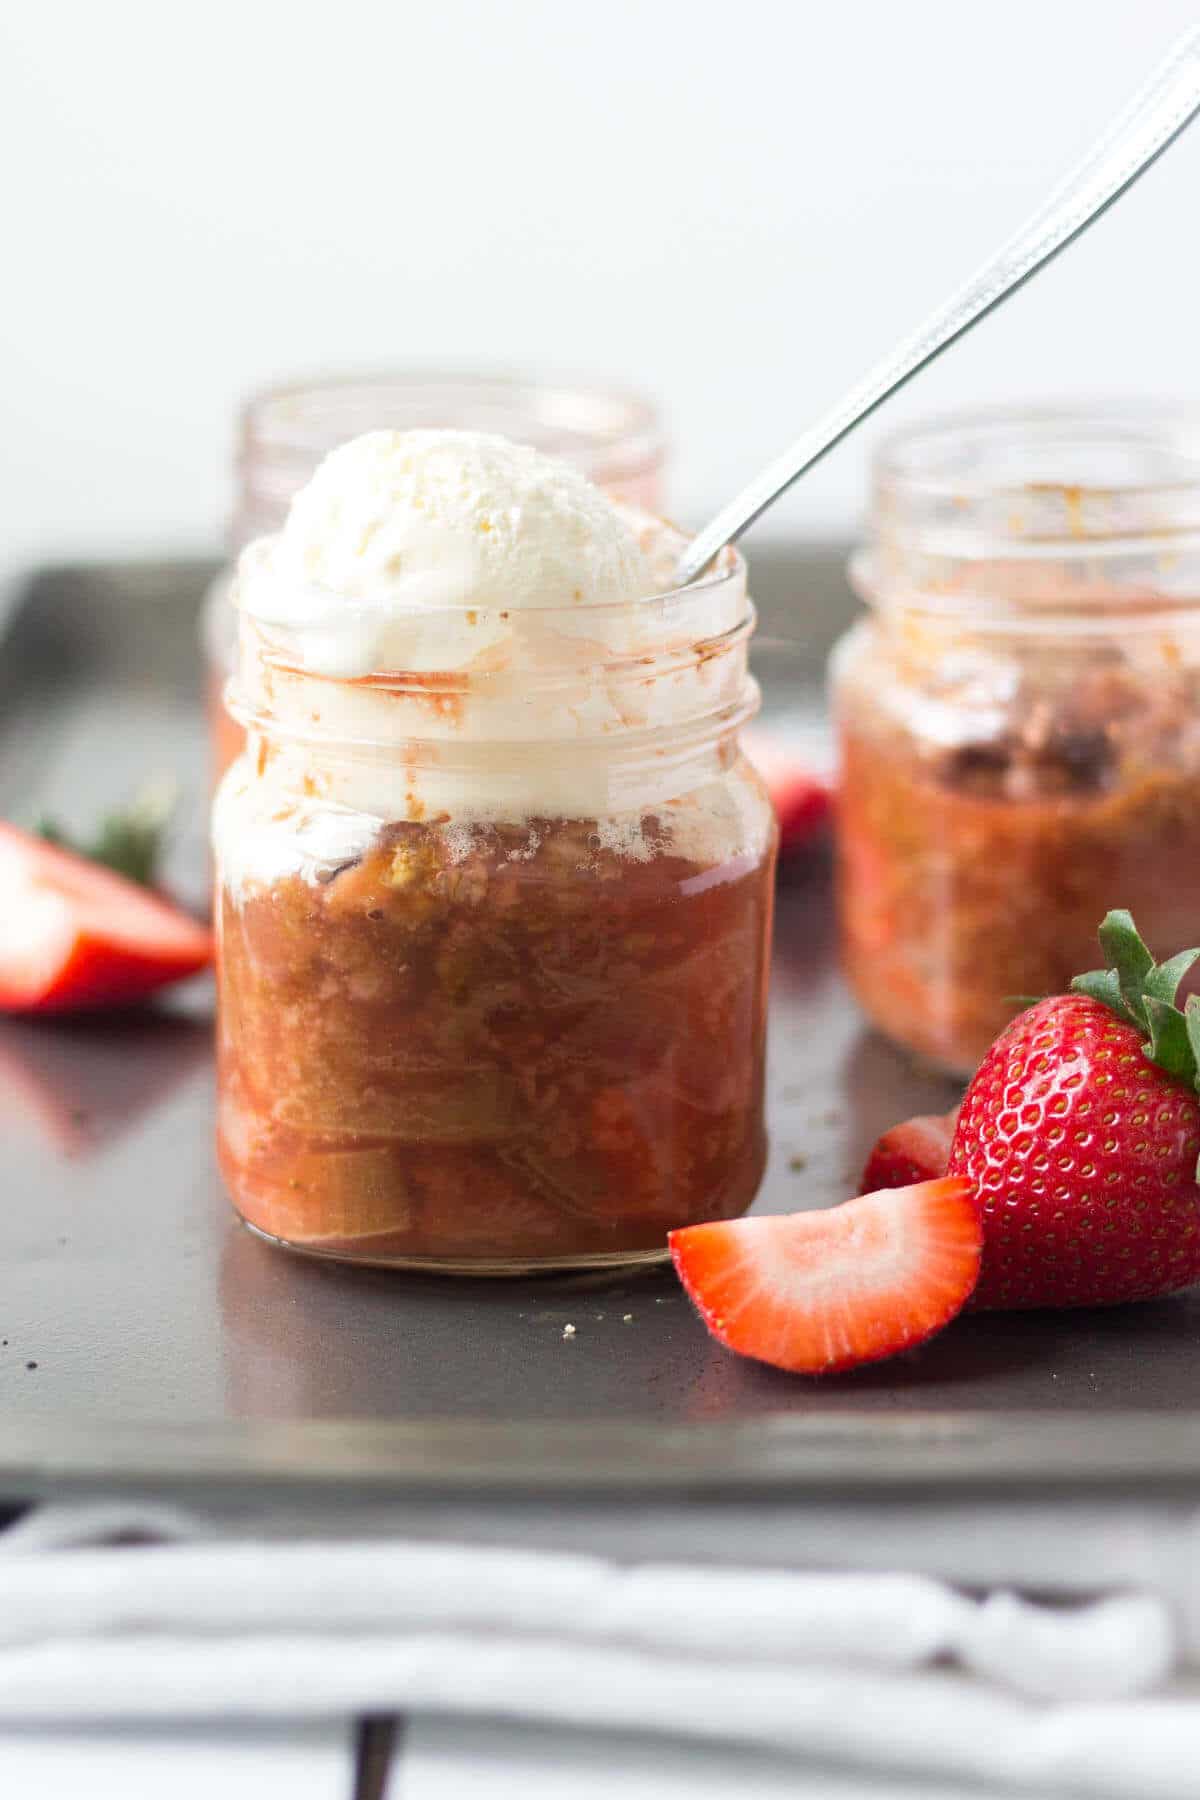 You will love this strawberry rhubarb crisp for all it's summertime flavor, but you will also love that it's vegan and gluten free and has no refined sugar!